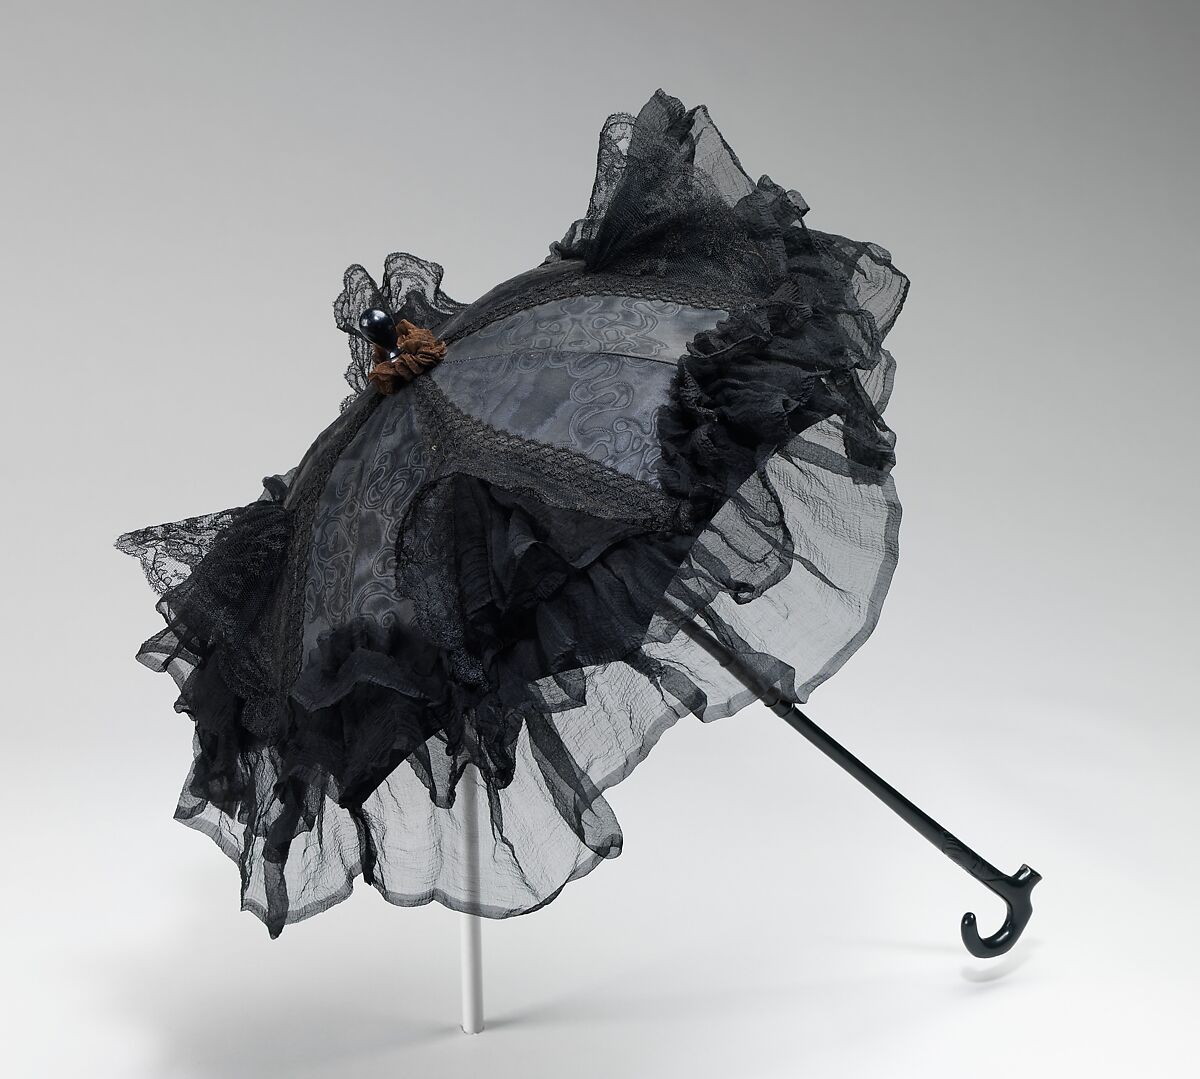 Parasol, Stern Brothers (American, founded New York, 1867), silk, wood, metal, American 